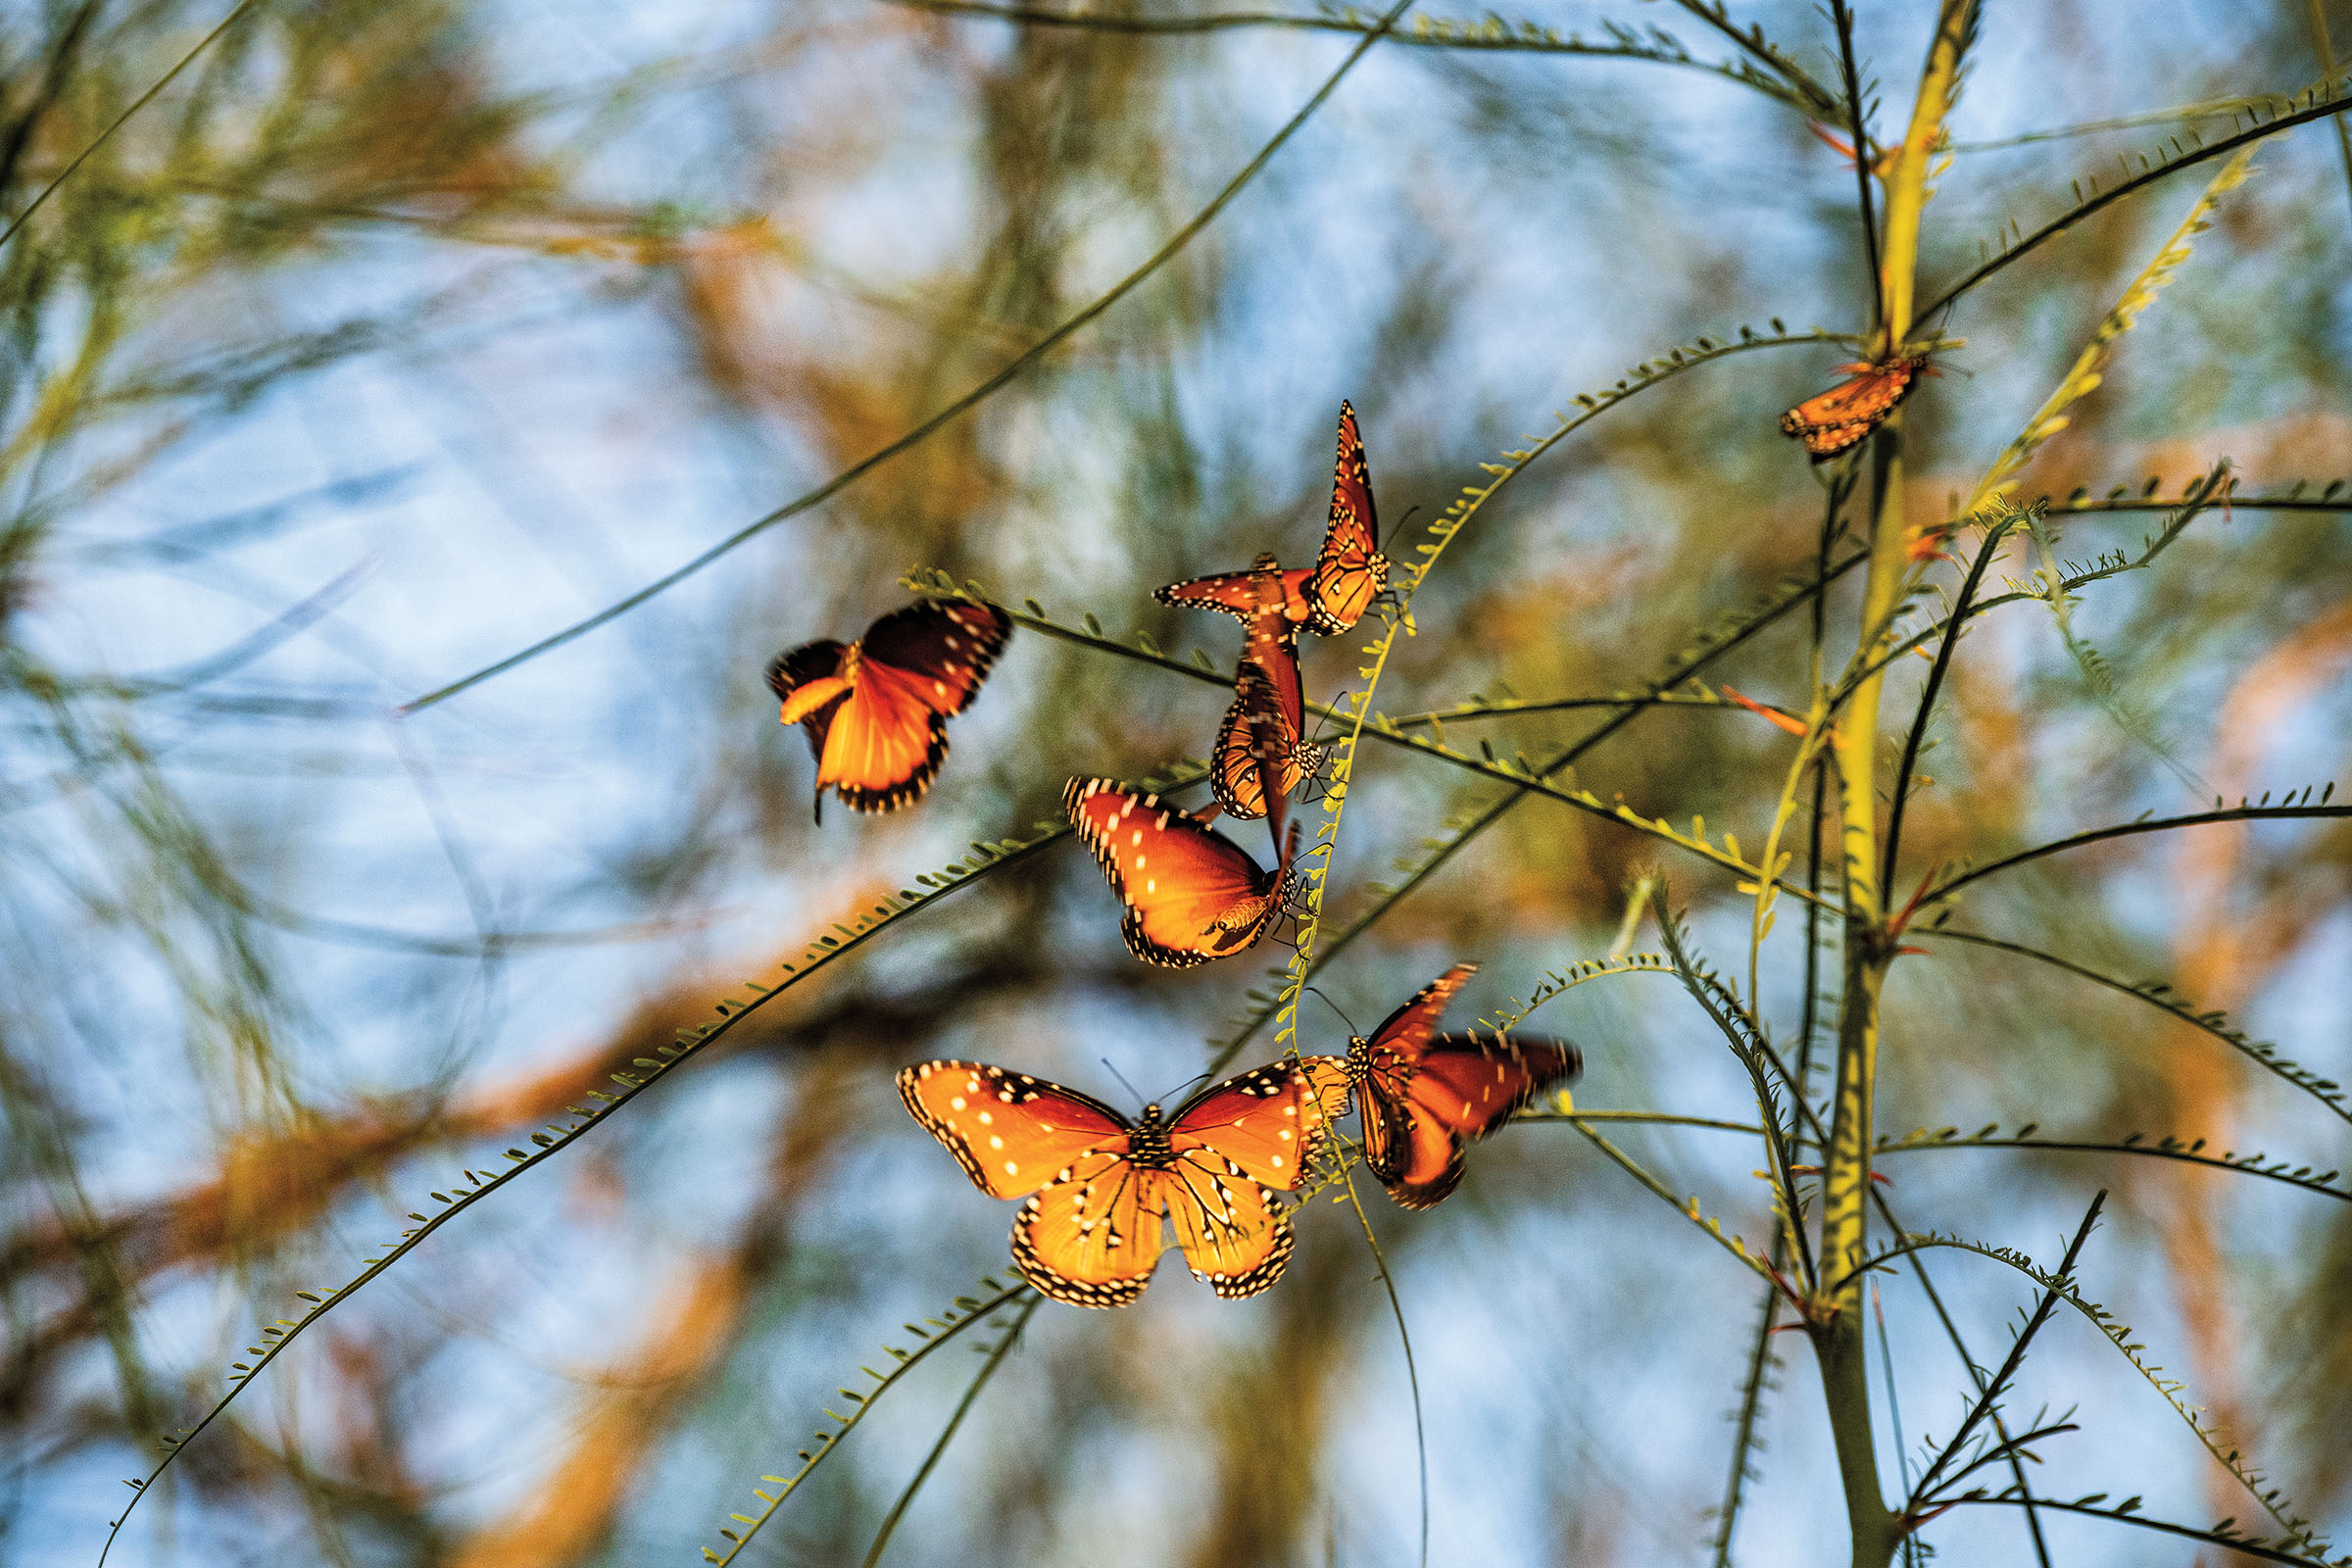 A group of bright orange Monarch butterflies perched on a thin branch